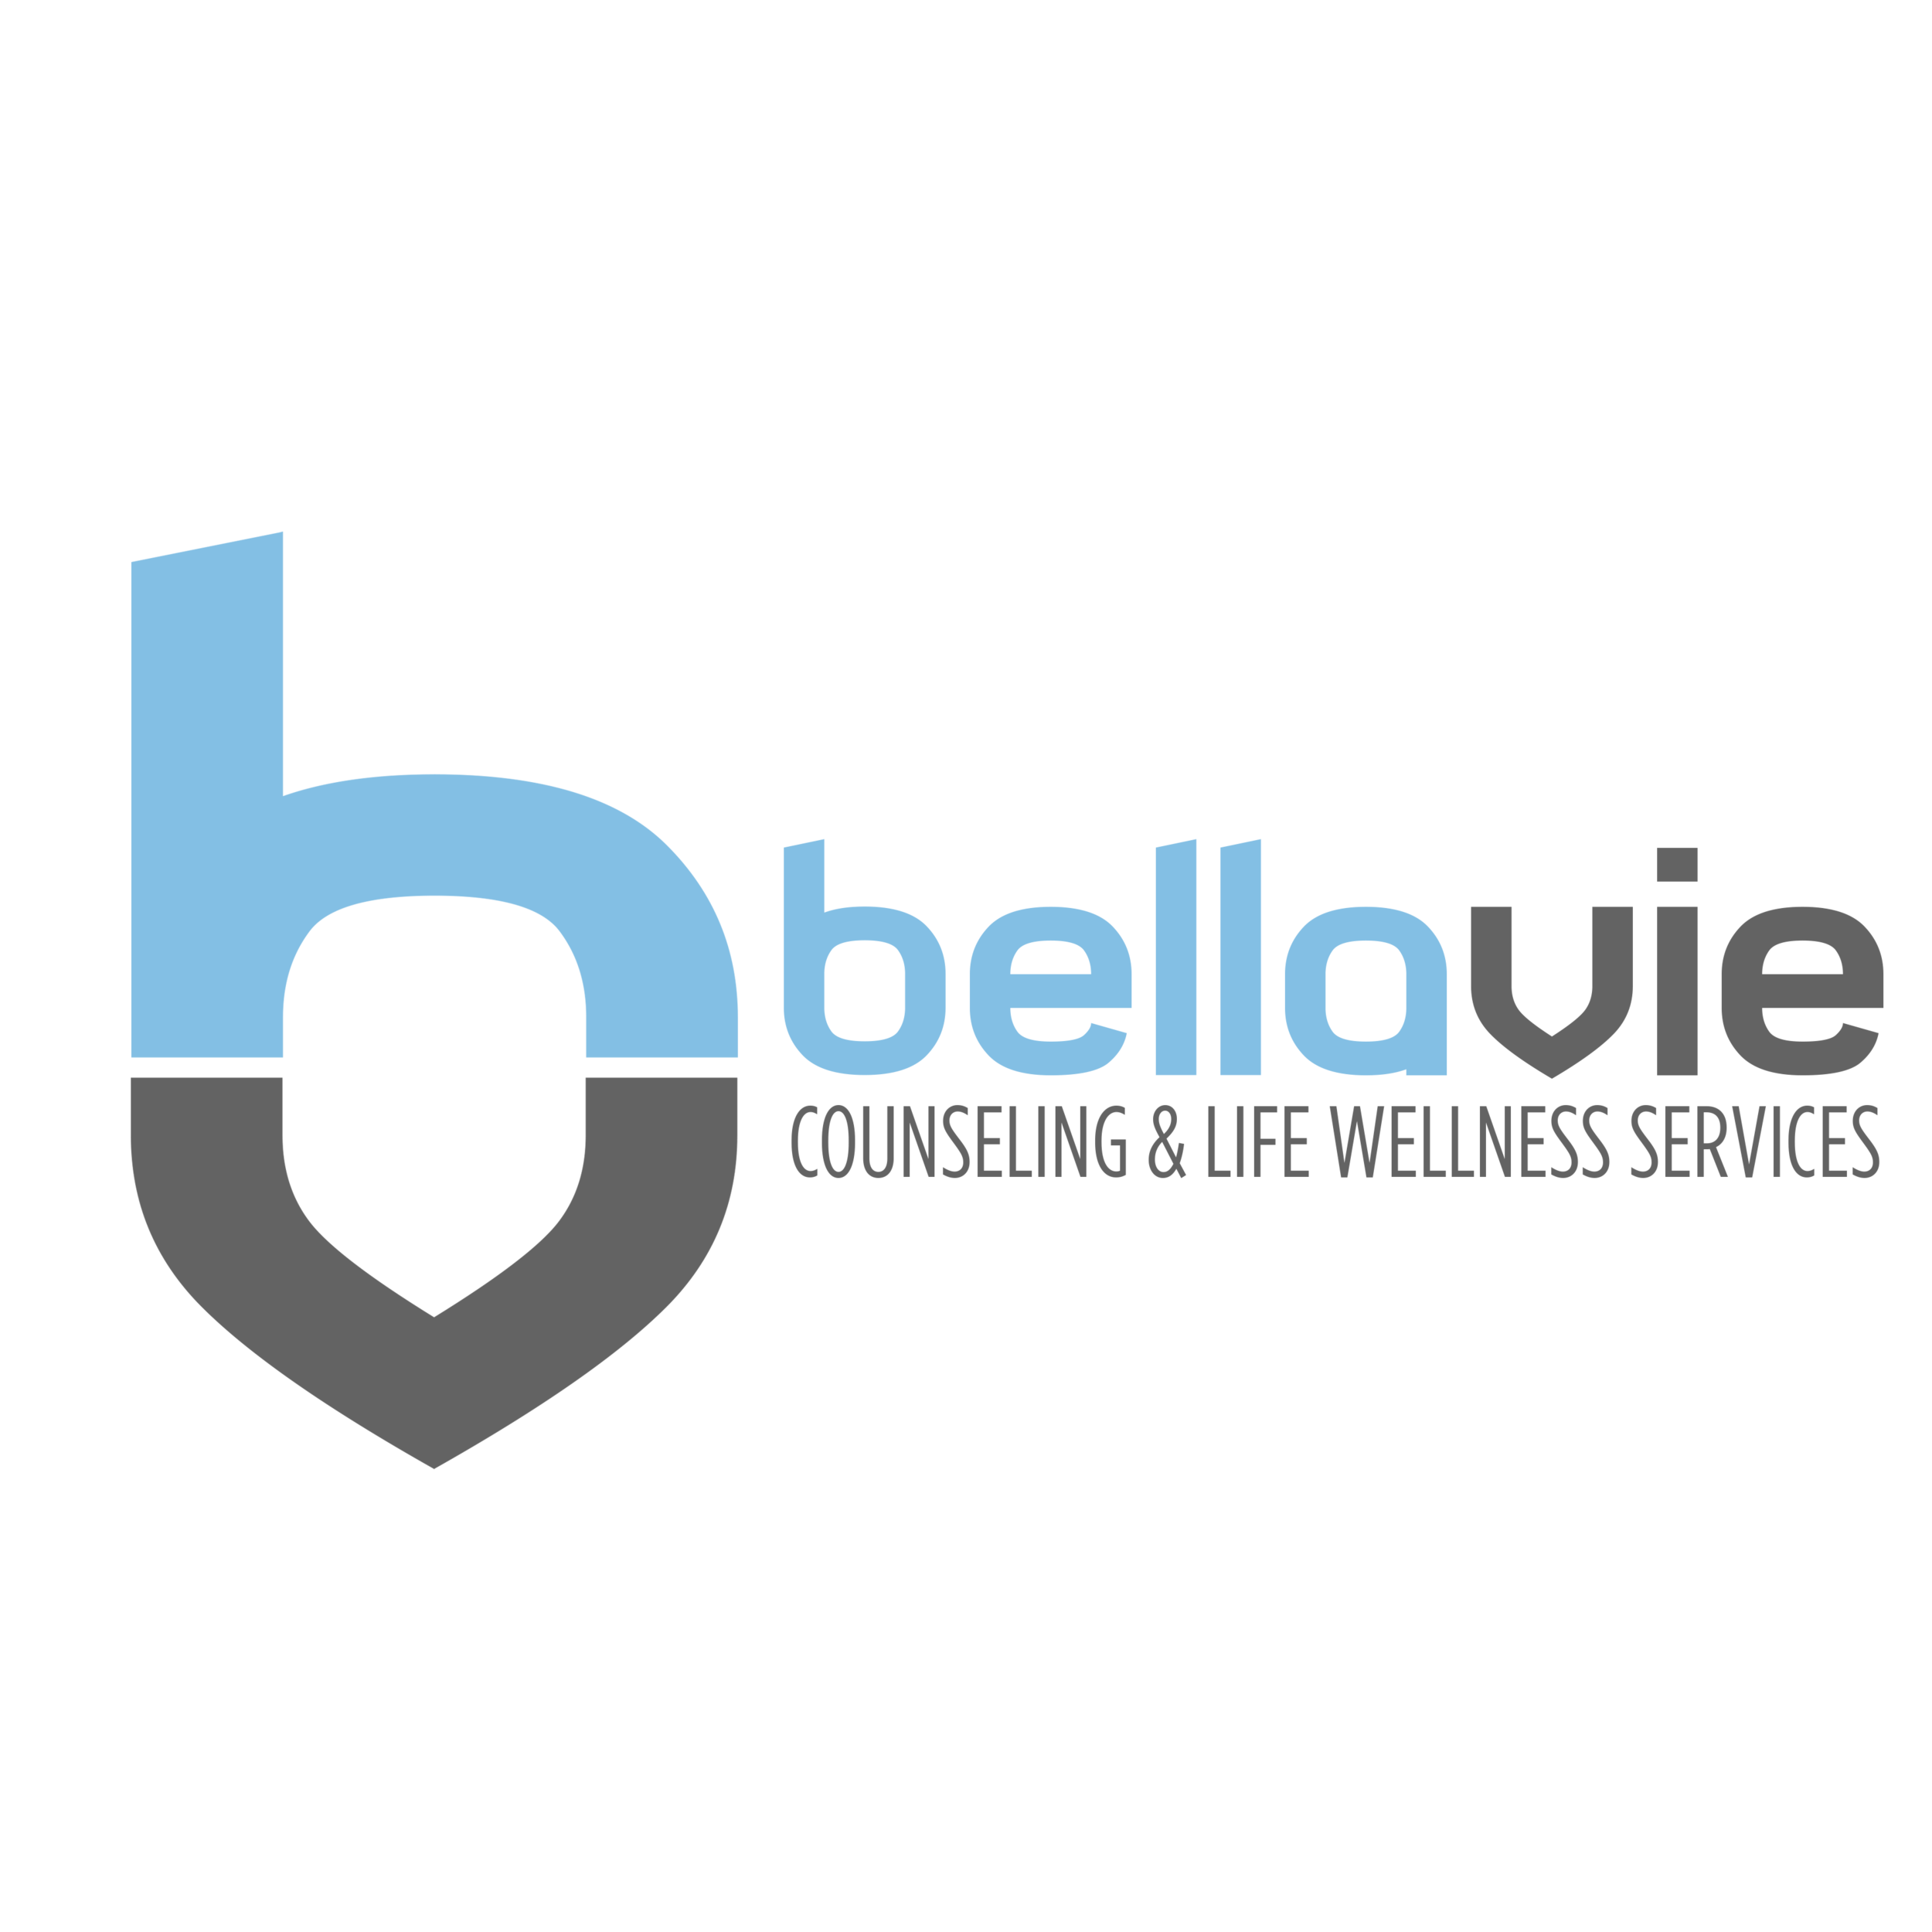 Bella Vie Counseling and Life Wellness Services